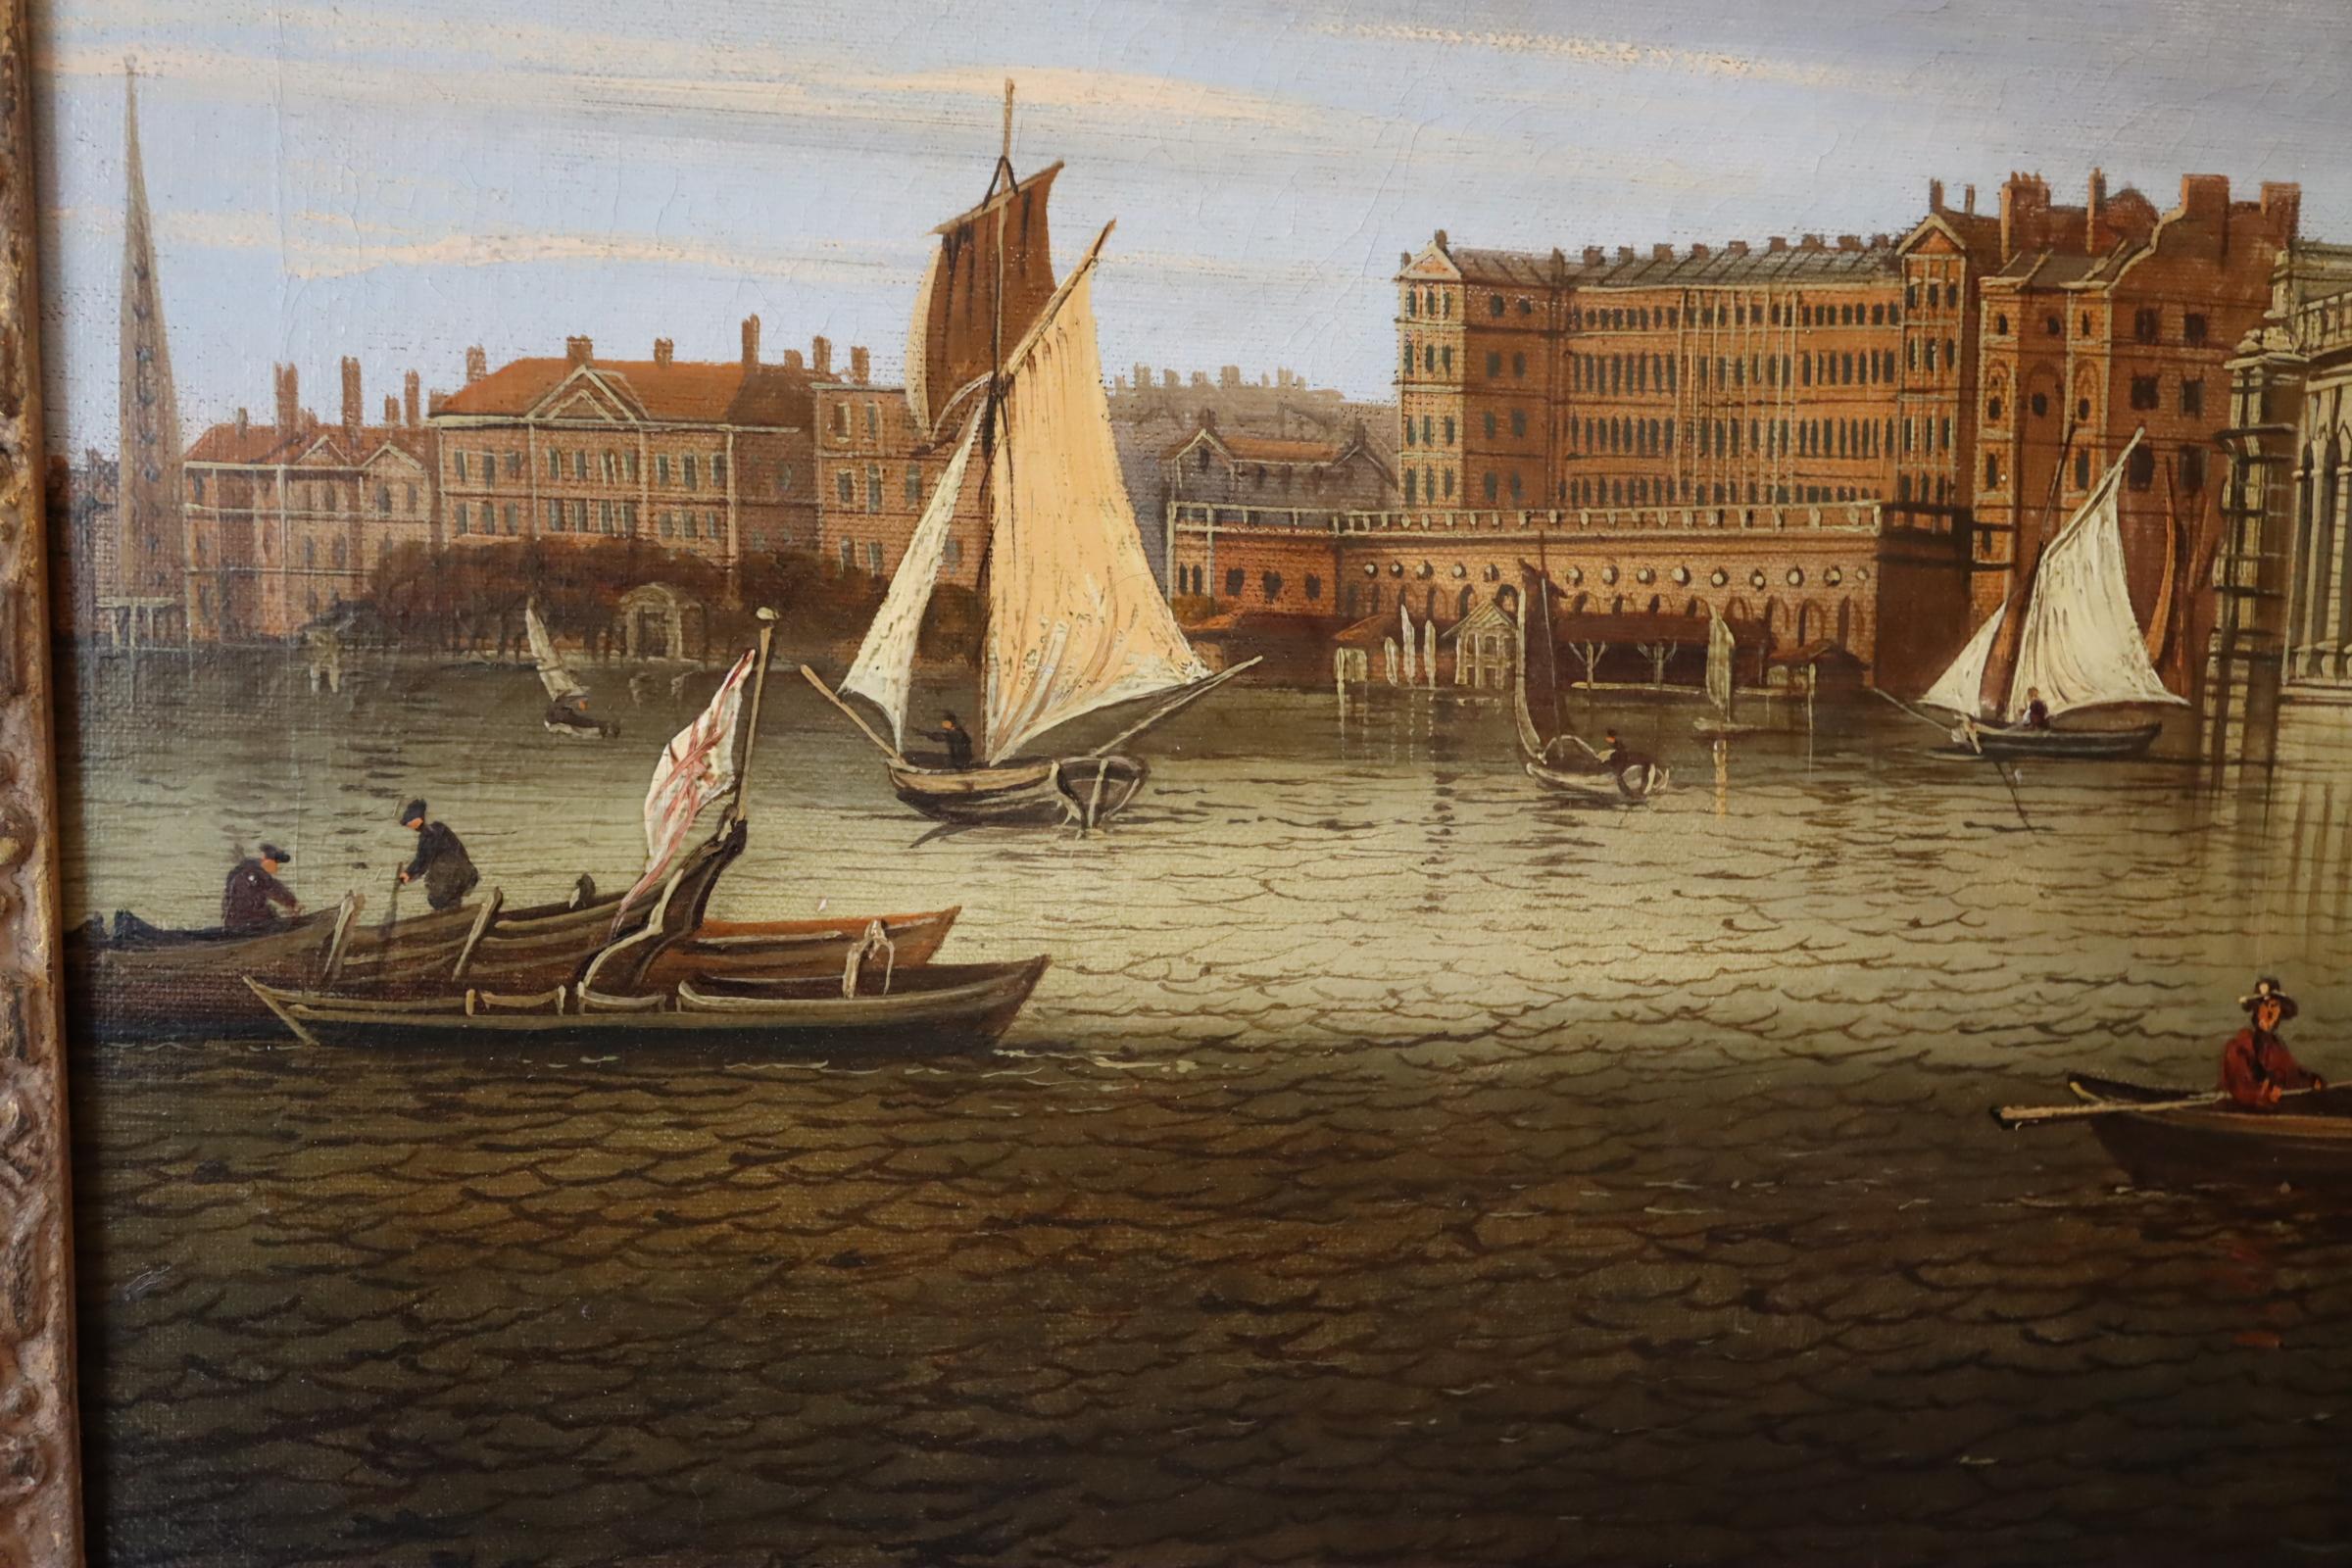 This stunning painting of the Thames by the Parliament building is a gorgeous example and is attributed to Canaletto.
Oil on Canvas
18 x 24 inches unframed
